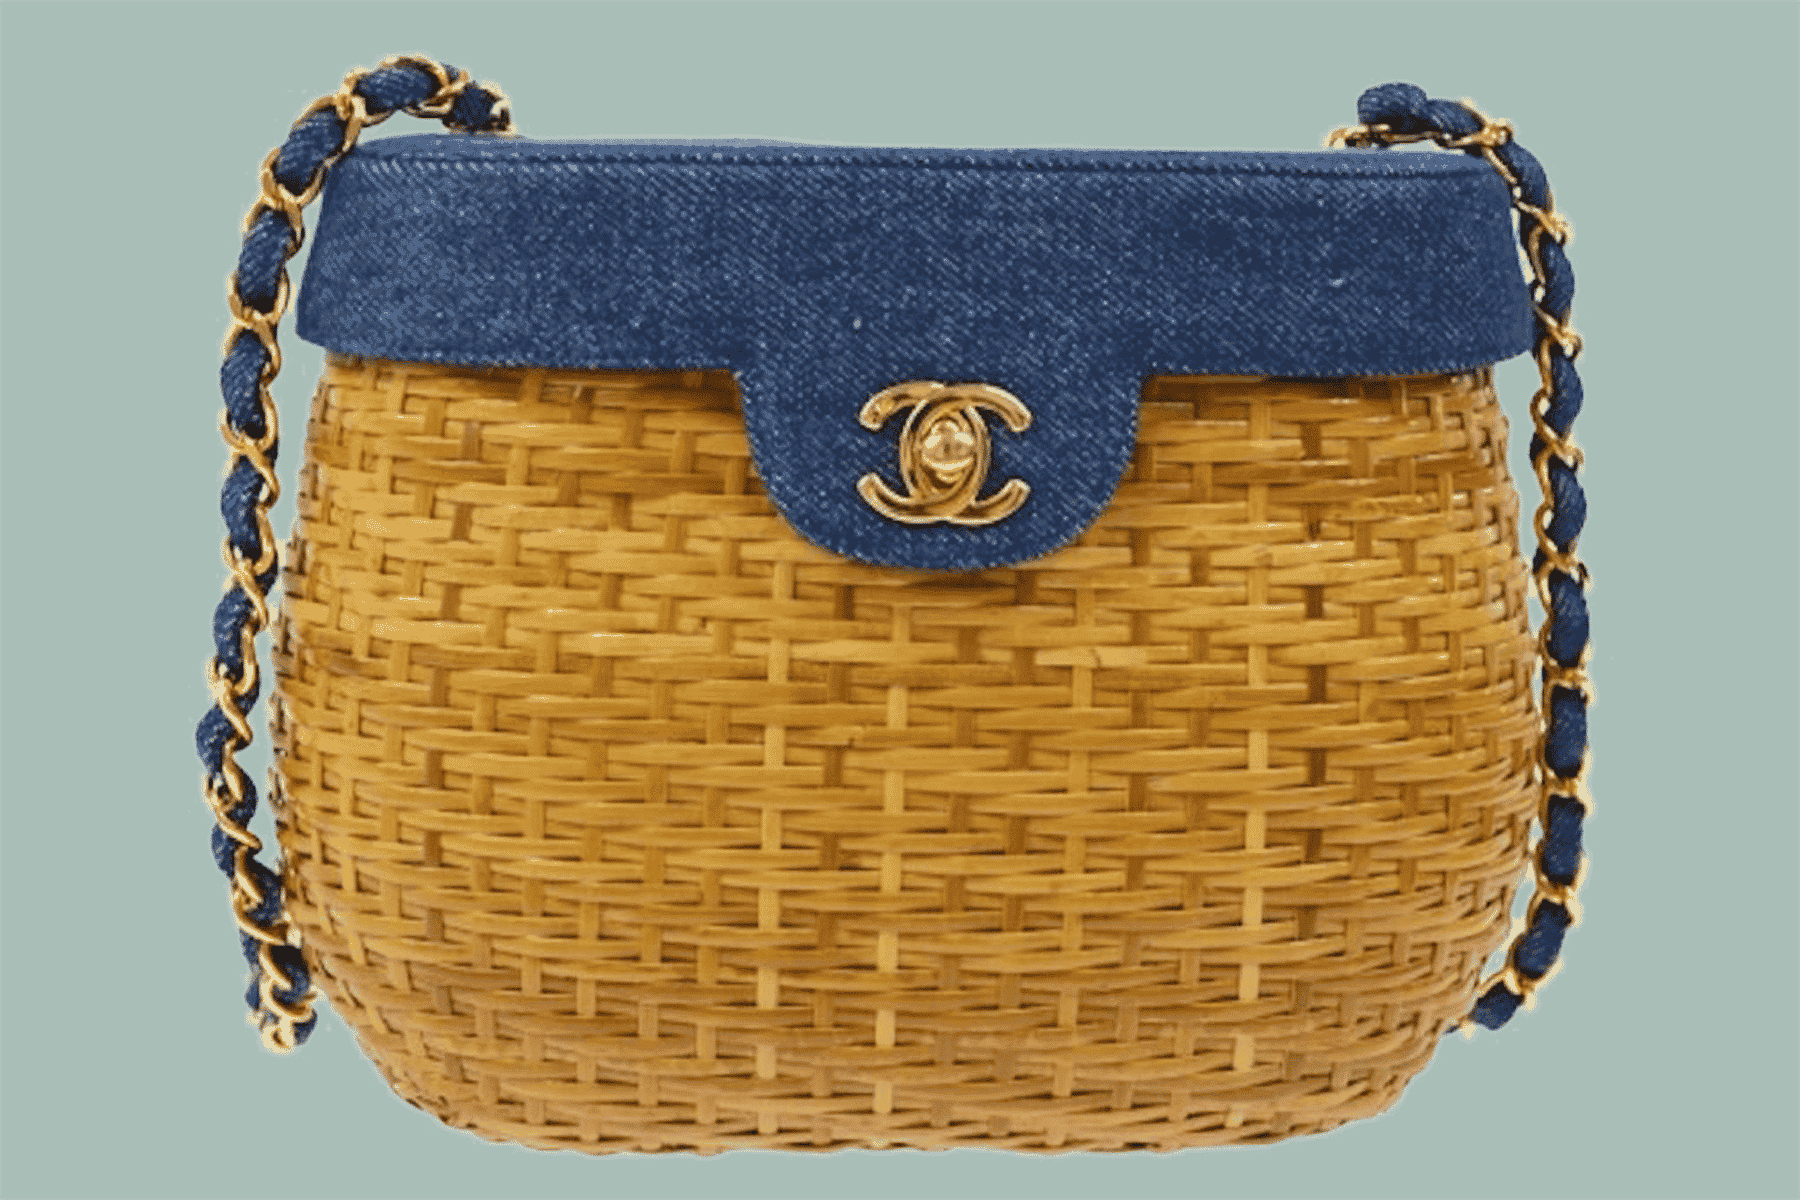 A Chanel Wicker Handbag Gives Impossibly Chic Picnic Vibes